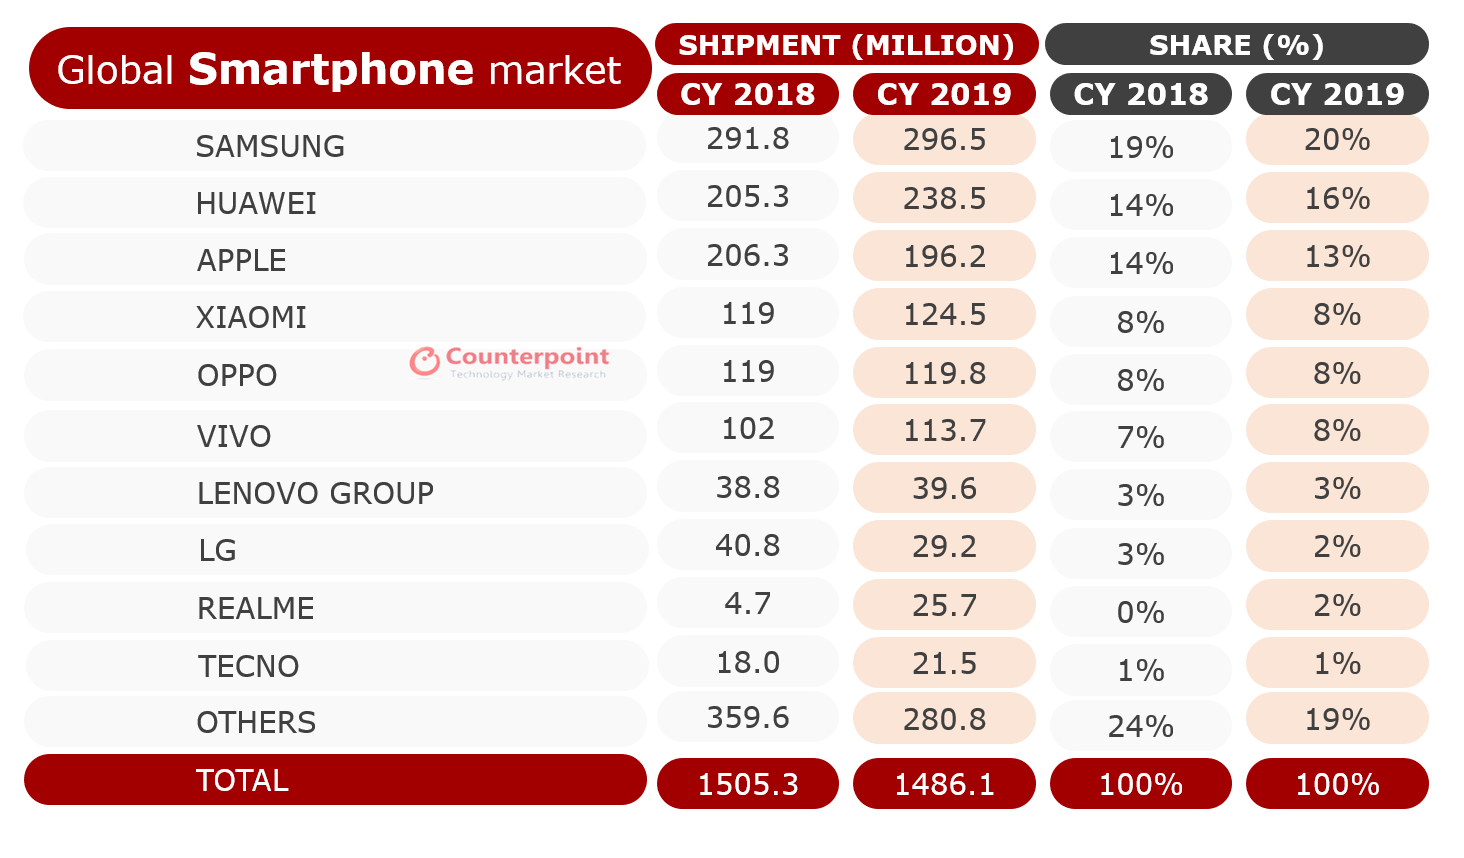 Counterpoint Smartphone Shipment Market Share CY 2018 and CY 2019